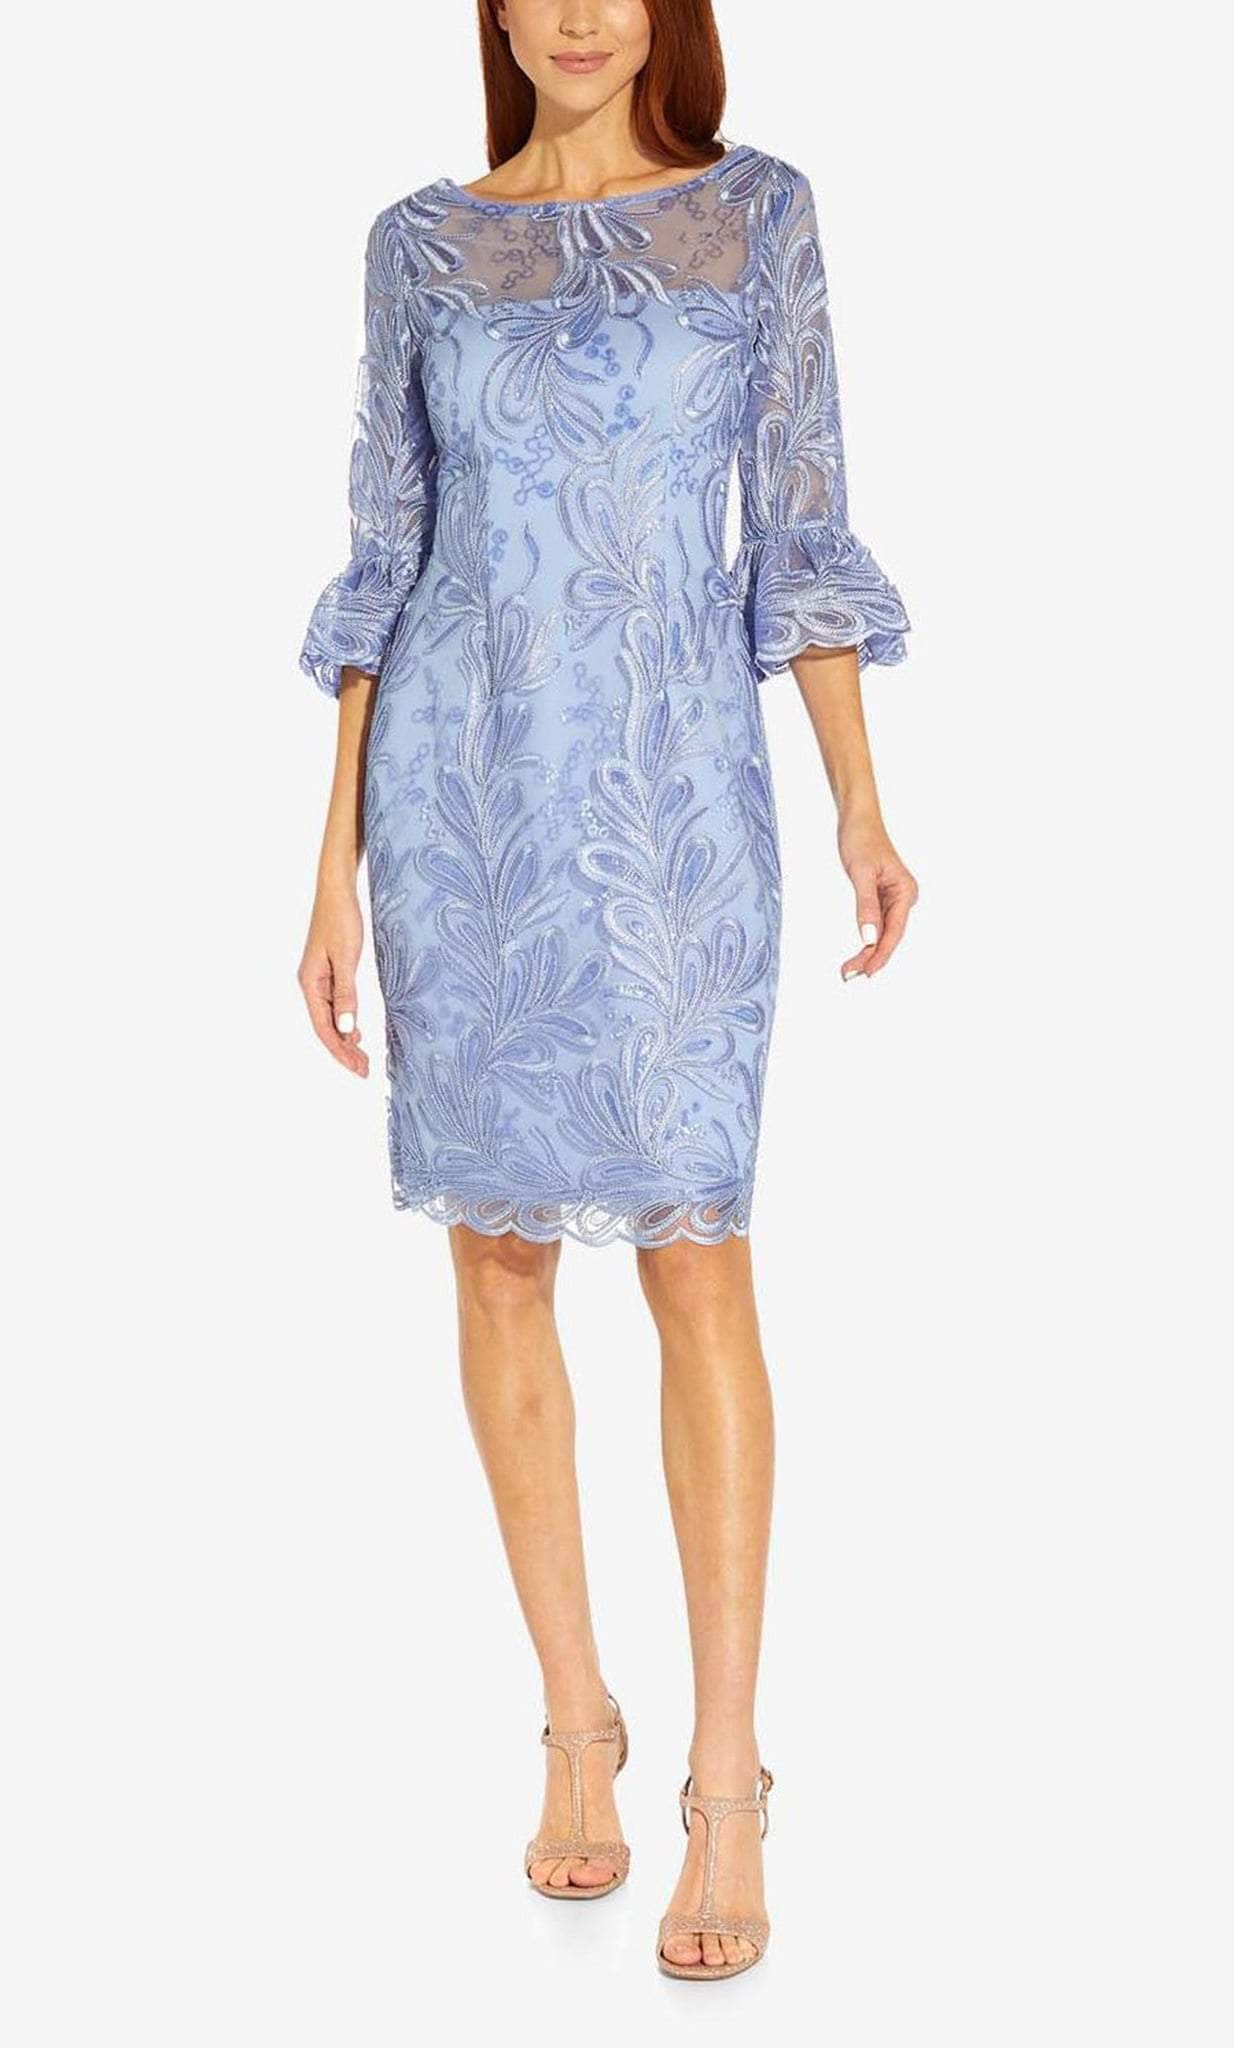 Adrianna Papell AP1D104722 - Embroidered Bell Sleeve Cocktail Dress Cocktail Dresses 0 / Light Peri